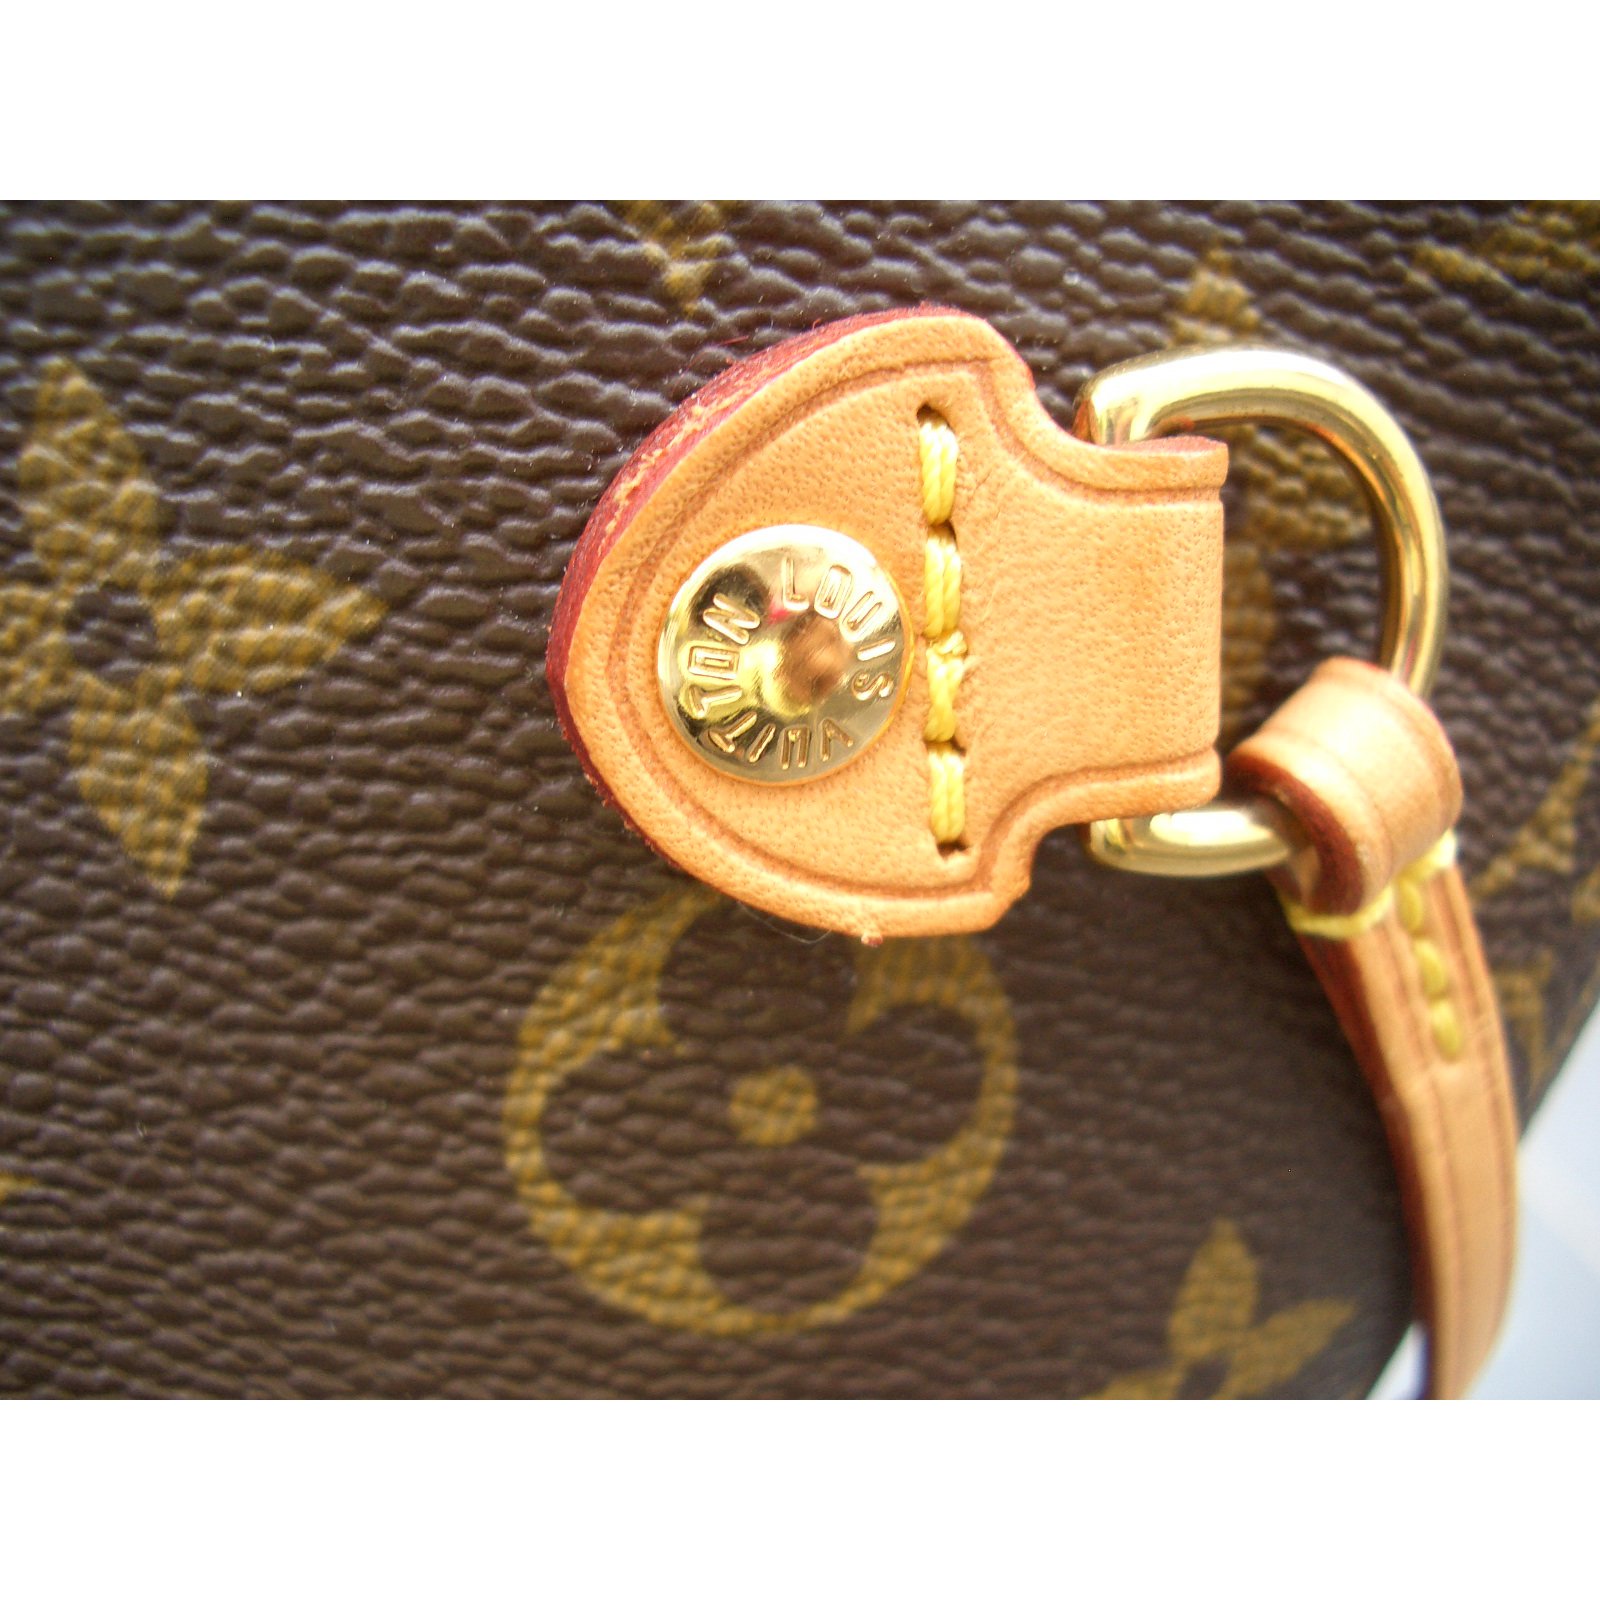 Louis Vuitton Limited Edition Neverfull Monogram St Barth Multiple